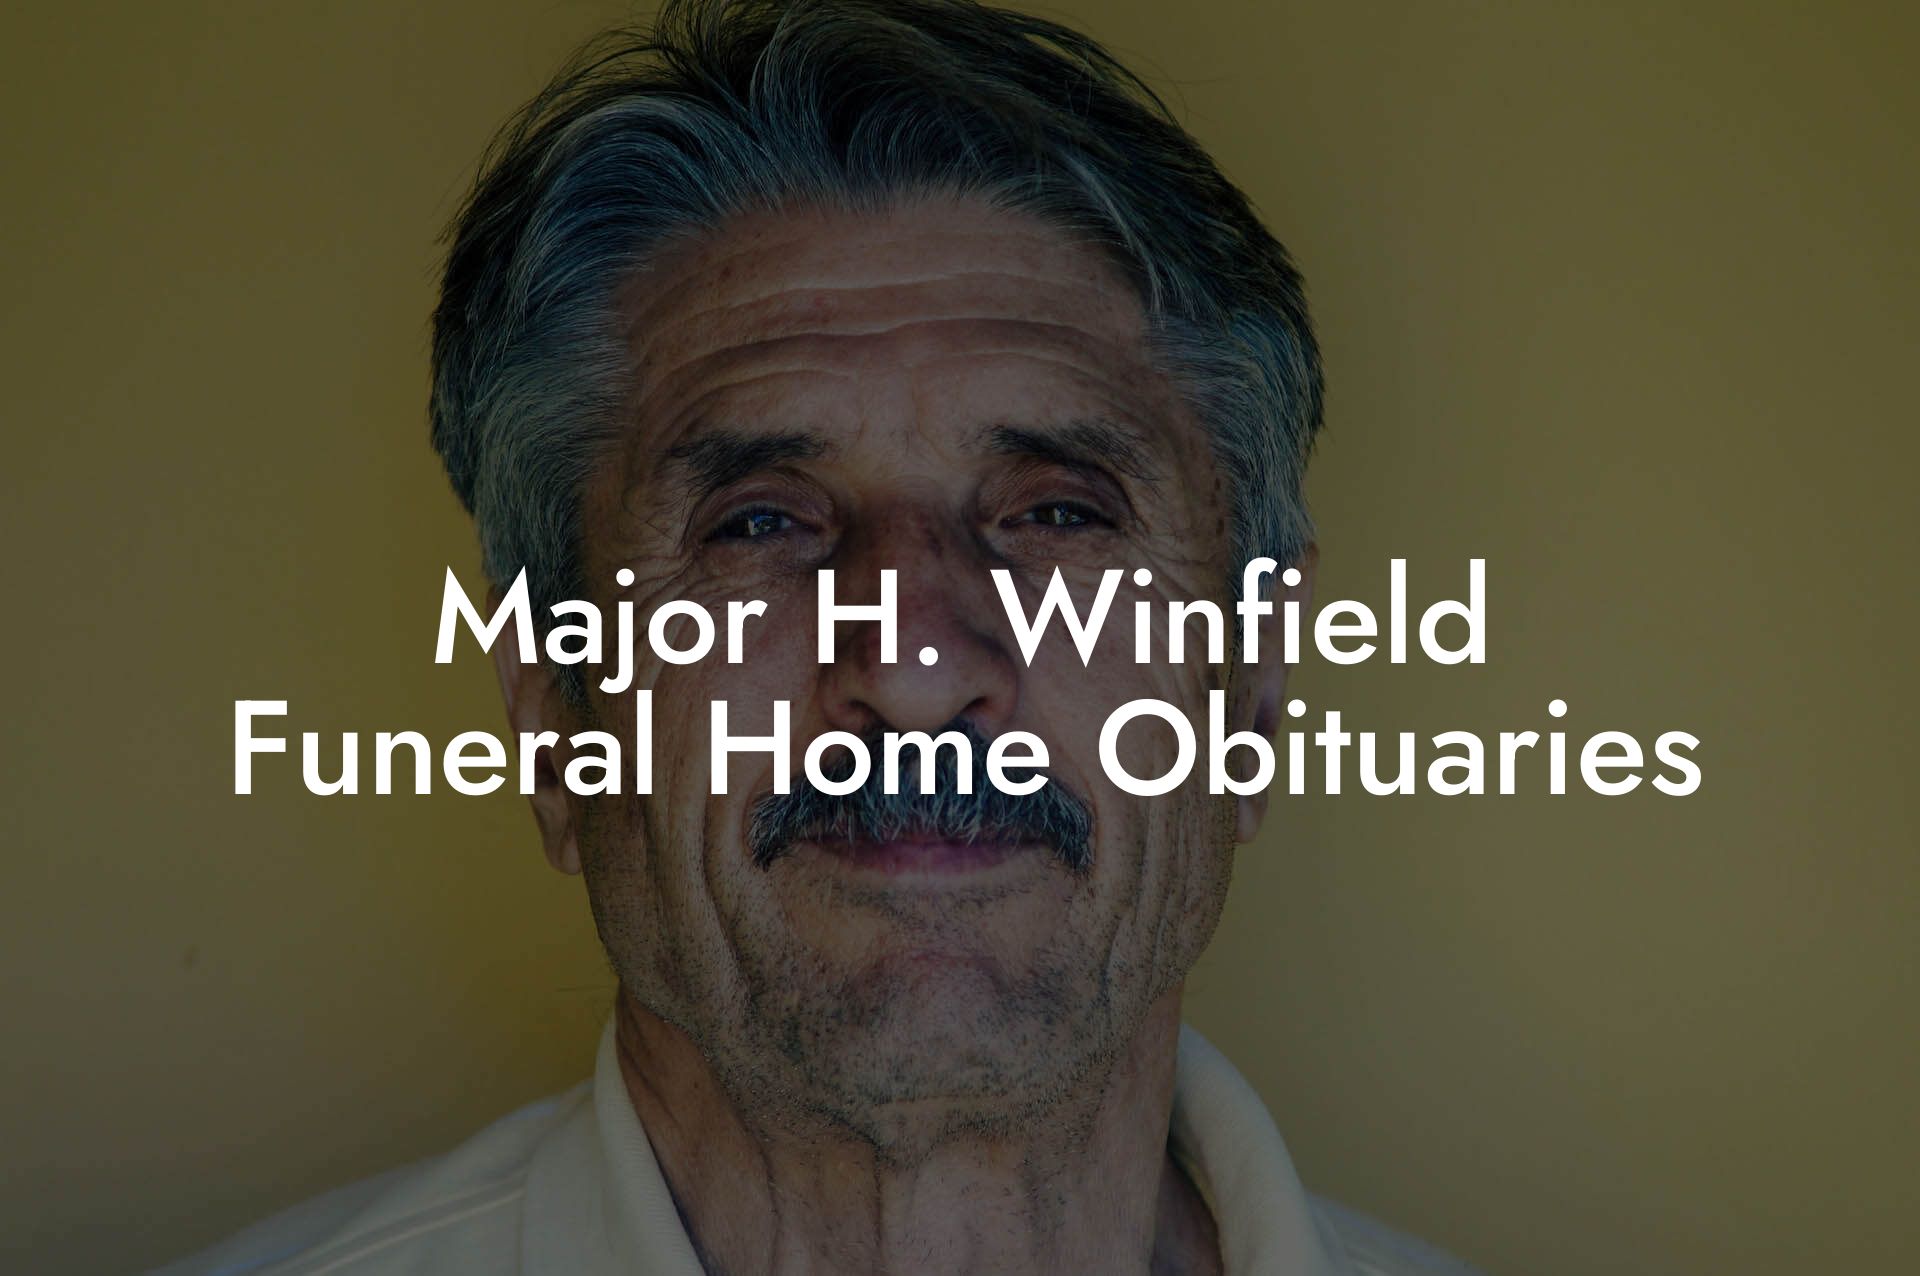 Major H. Winfield Funeral Home Obituaries